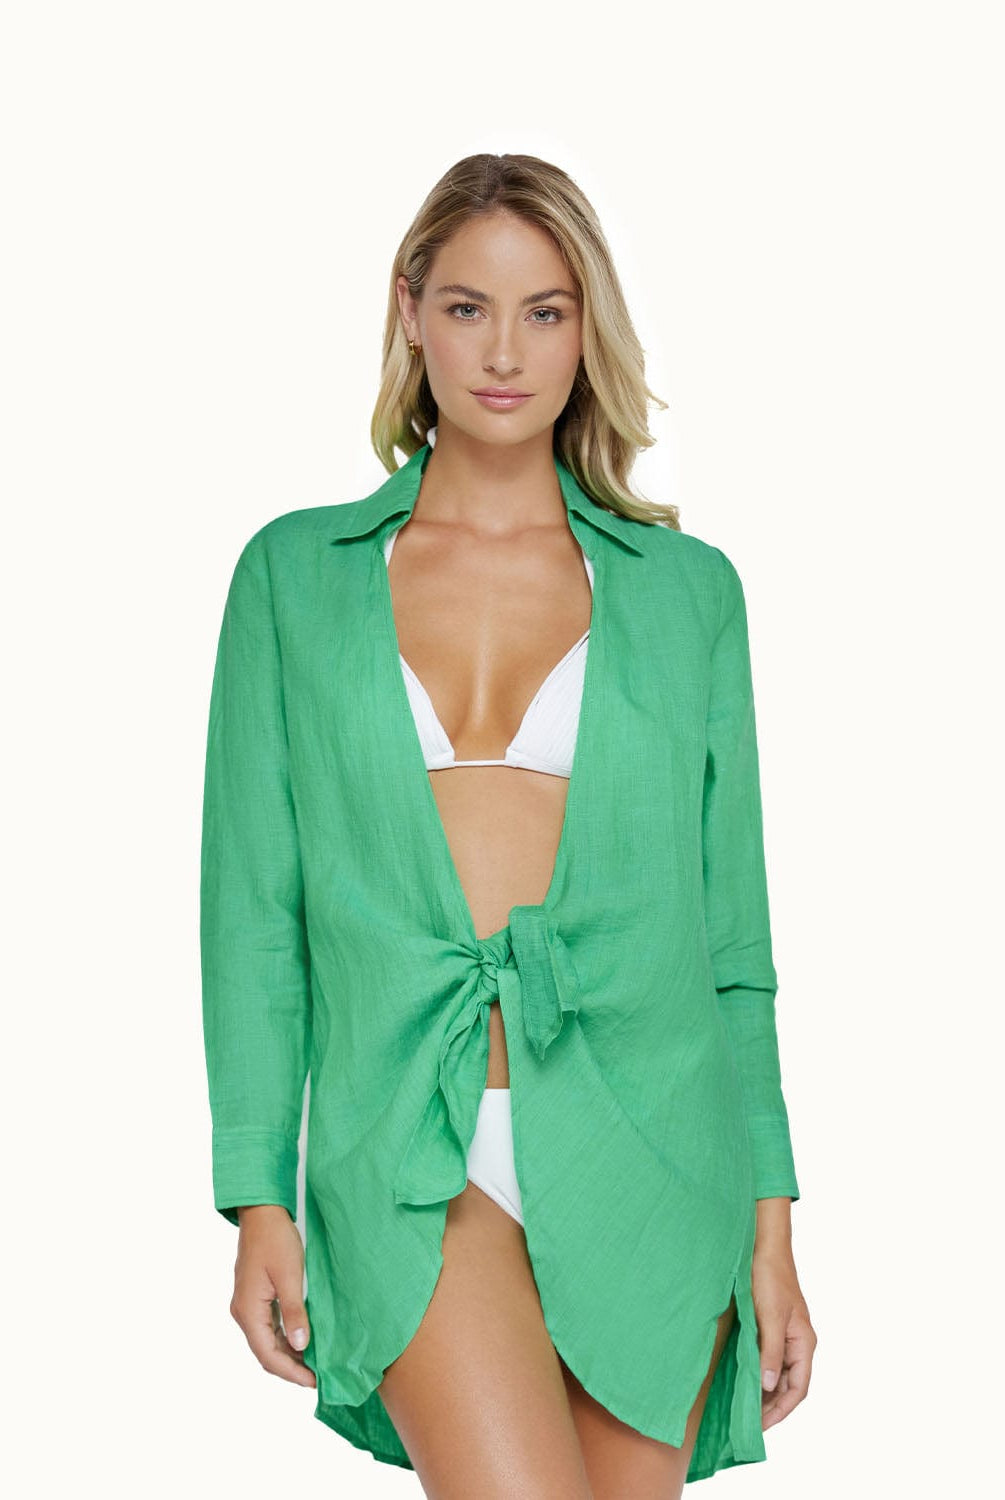 A blonde woman wearing a white bikini and a green long sleeve cover up against a white wall. 